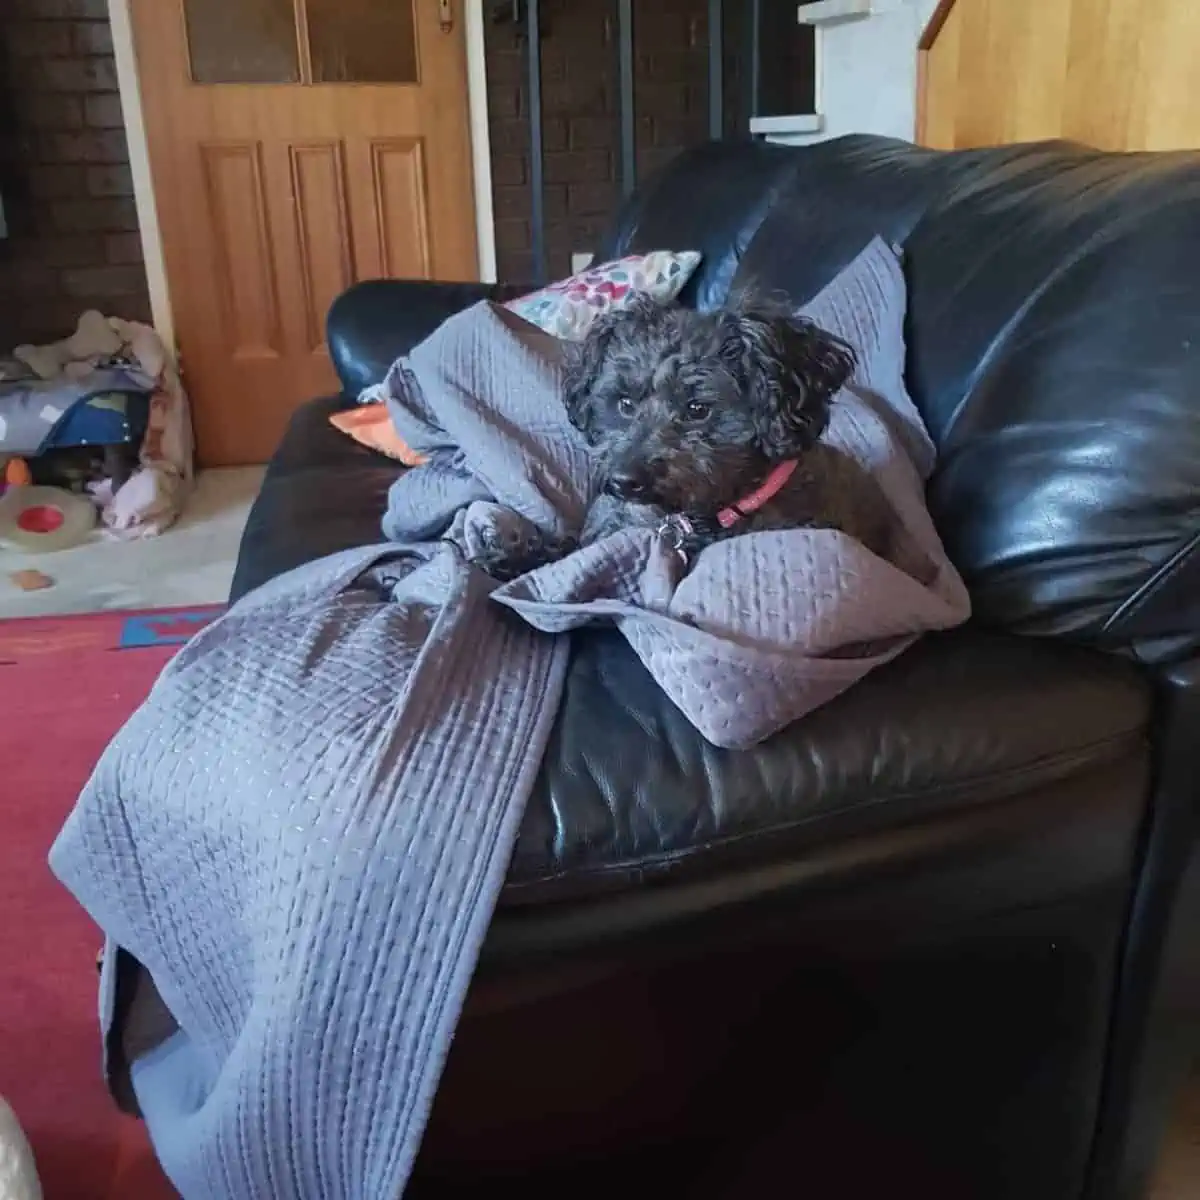 Poodle and warm blanket